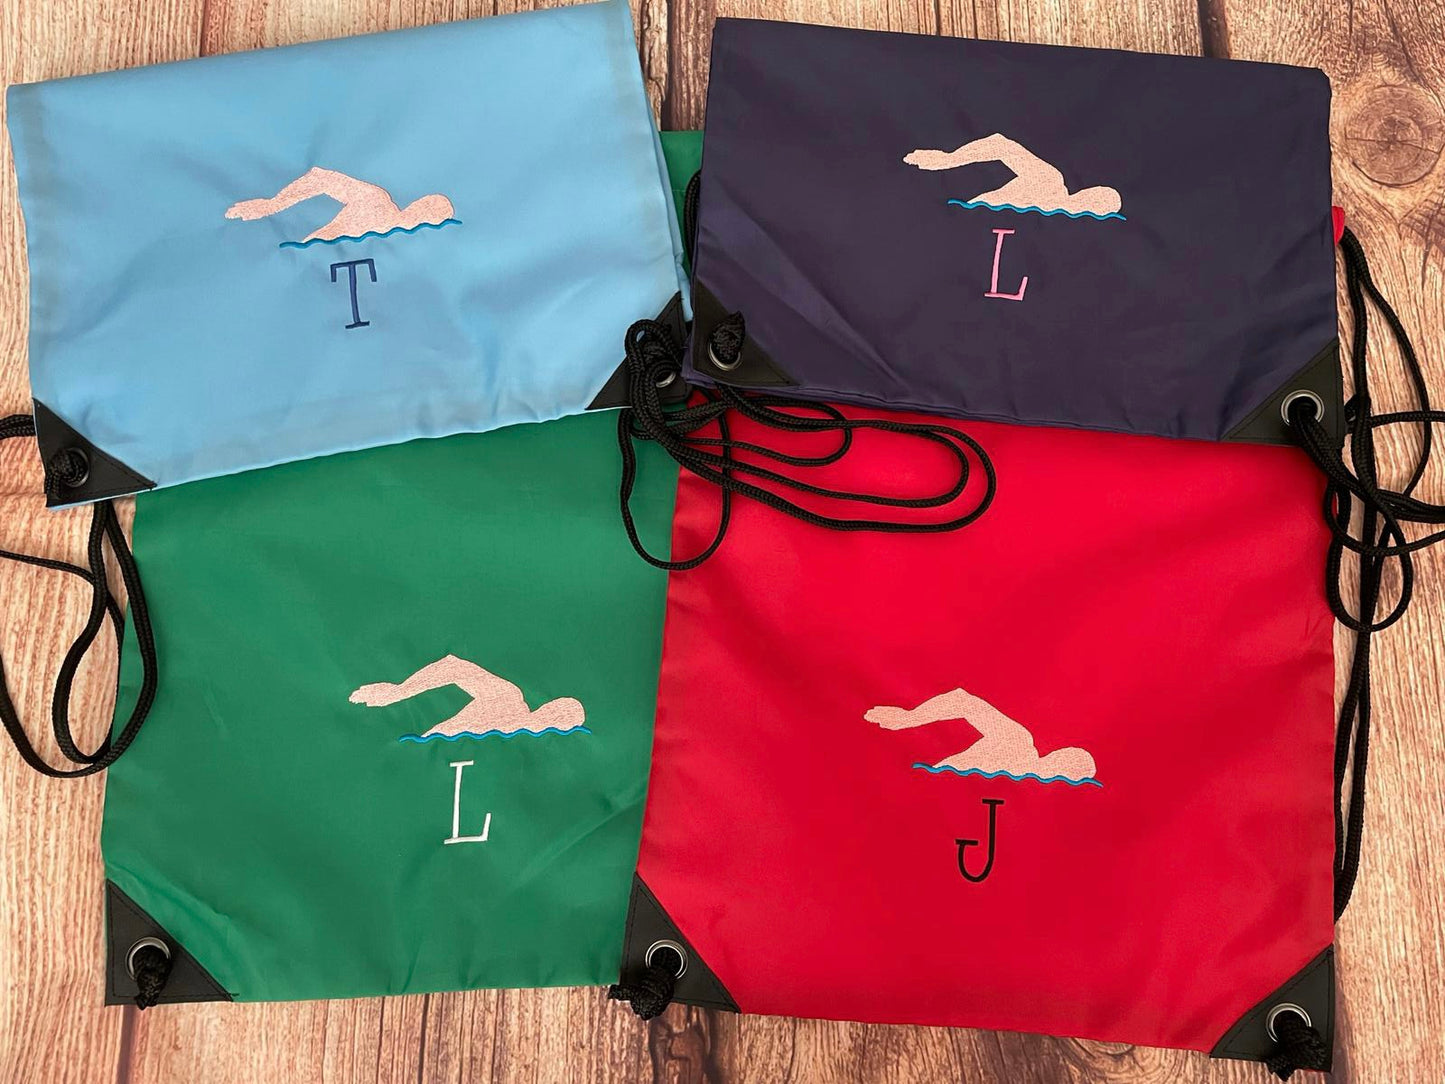 Embroidered swimming bag